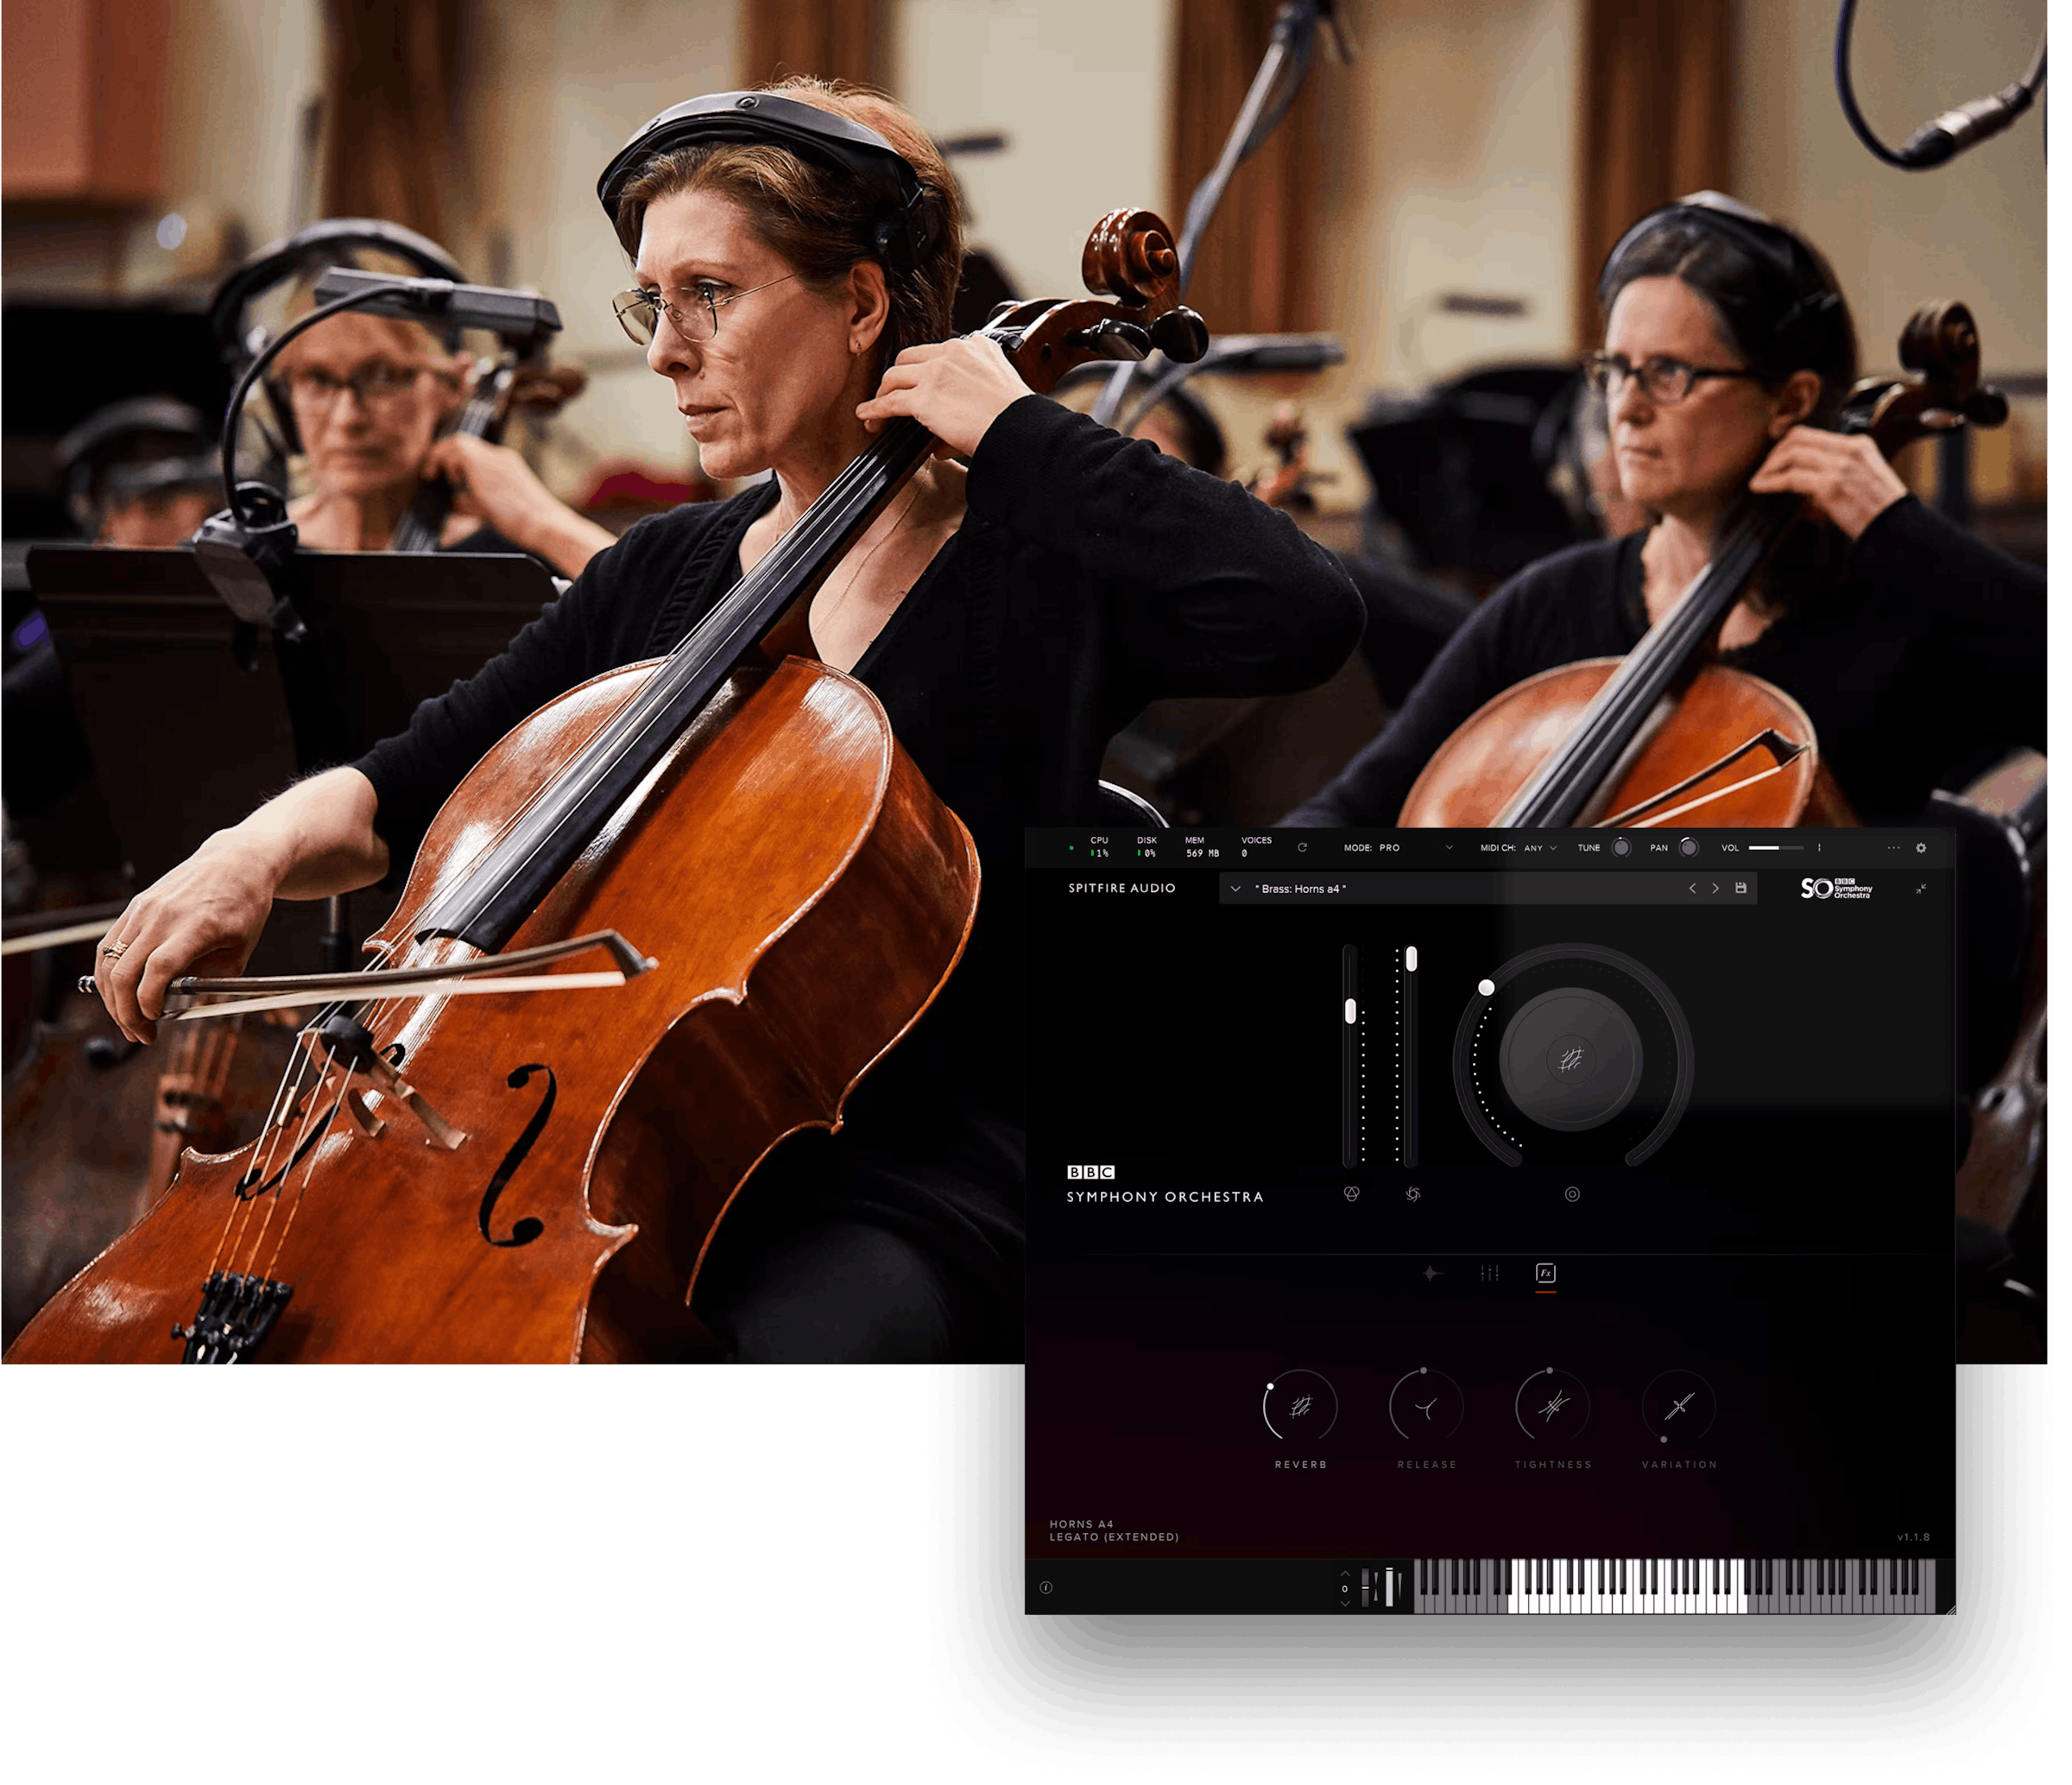 Professional GUI laid over image of Cellists